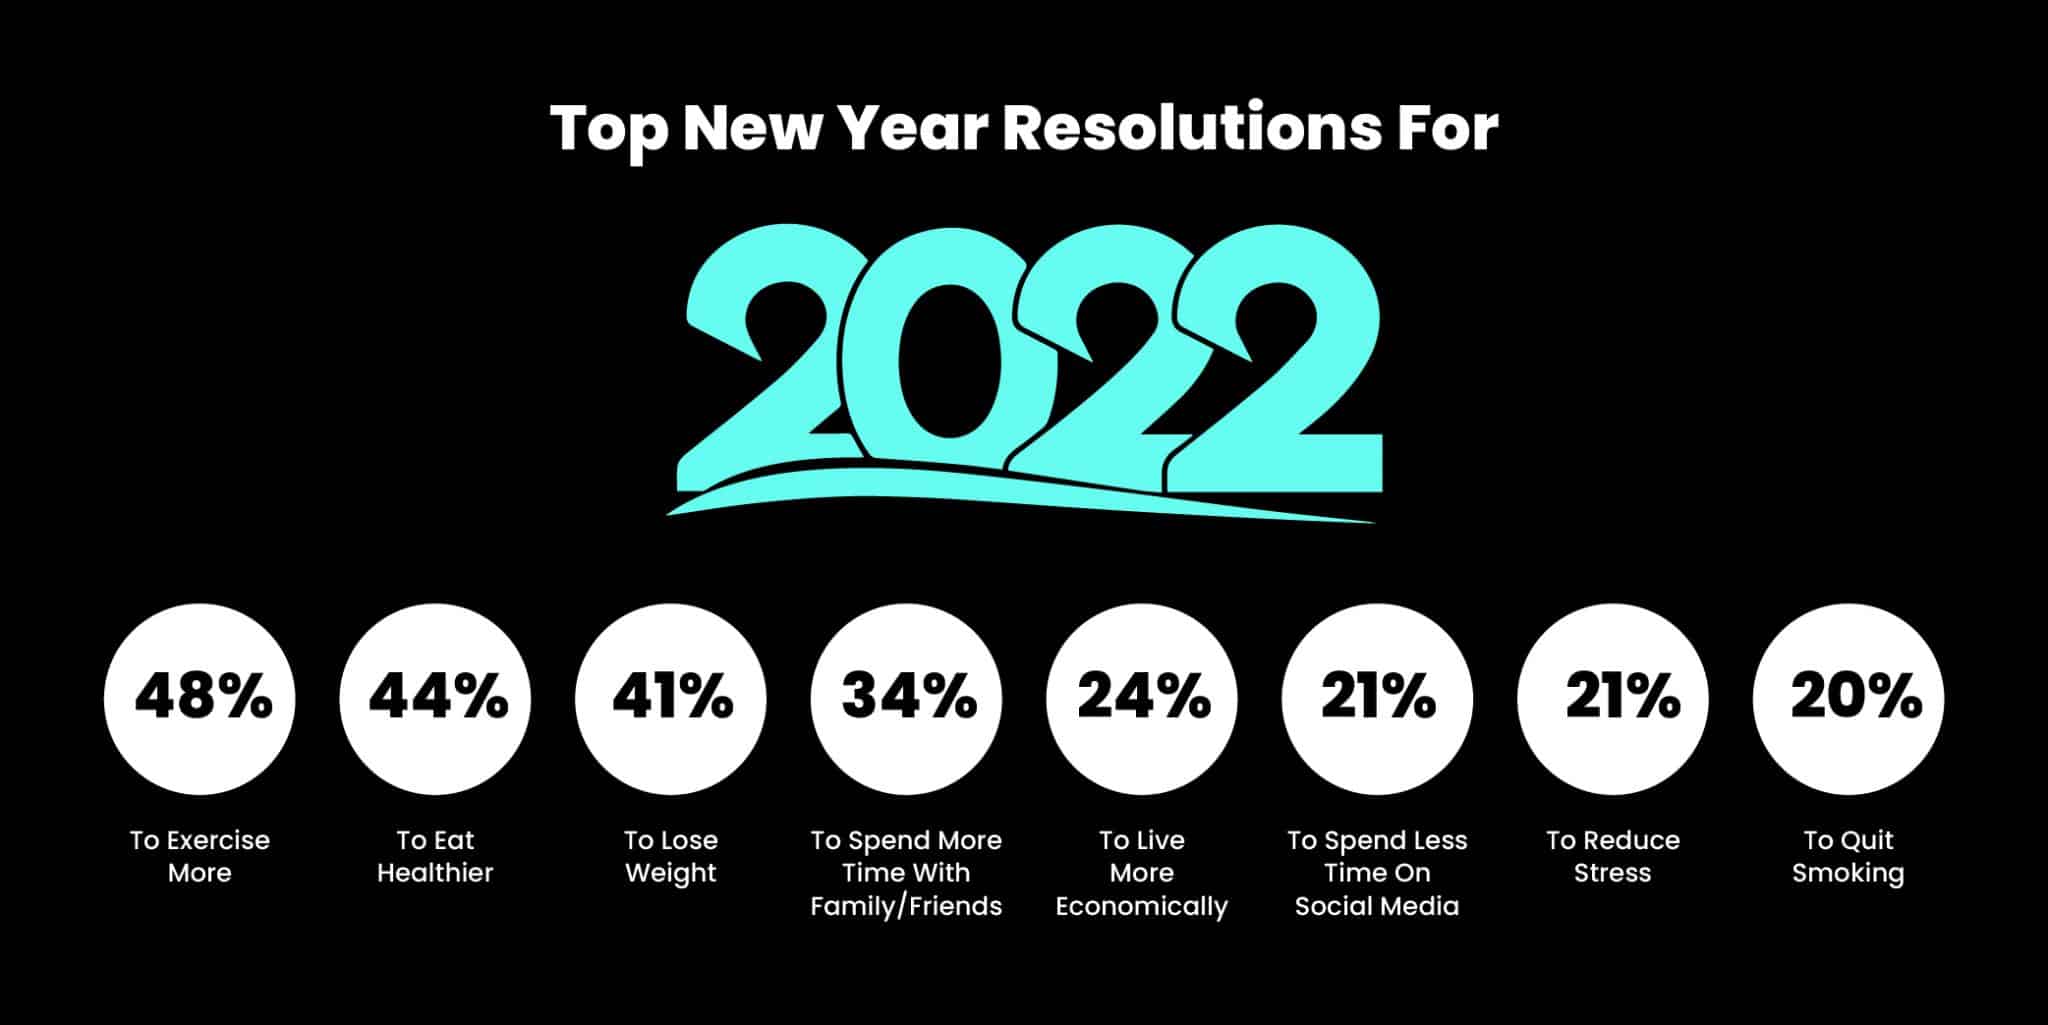 Tap into the new year resolutions of your target market as holiday marketing tactic